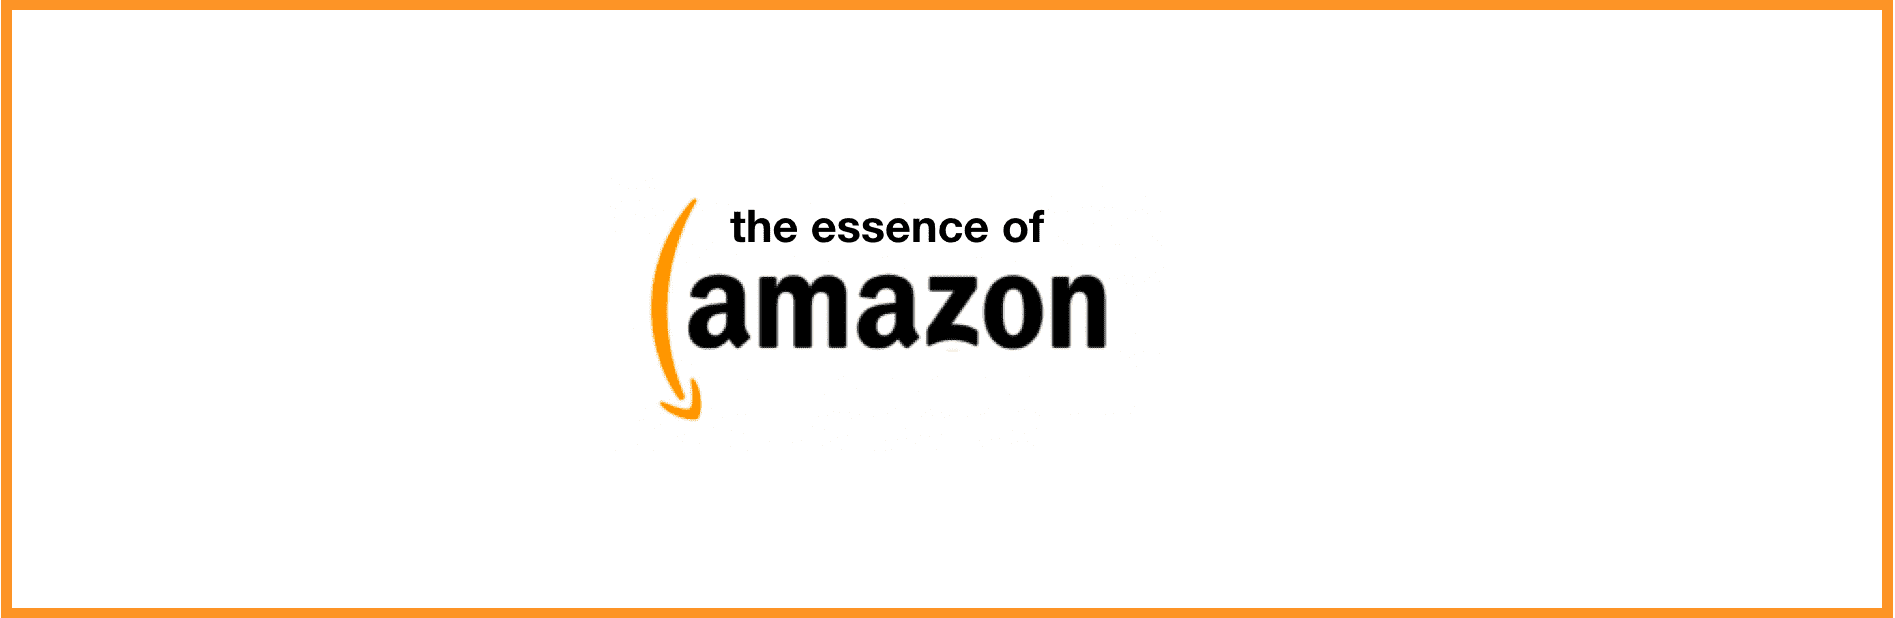 What’s the Amazon brand? Where’s the Essence? And how can Jeff Bezos be replaced?